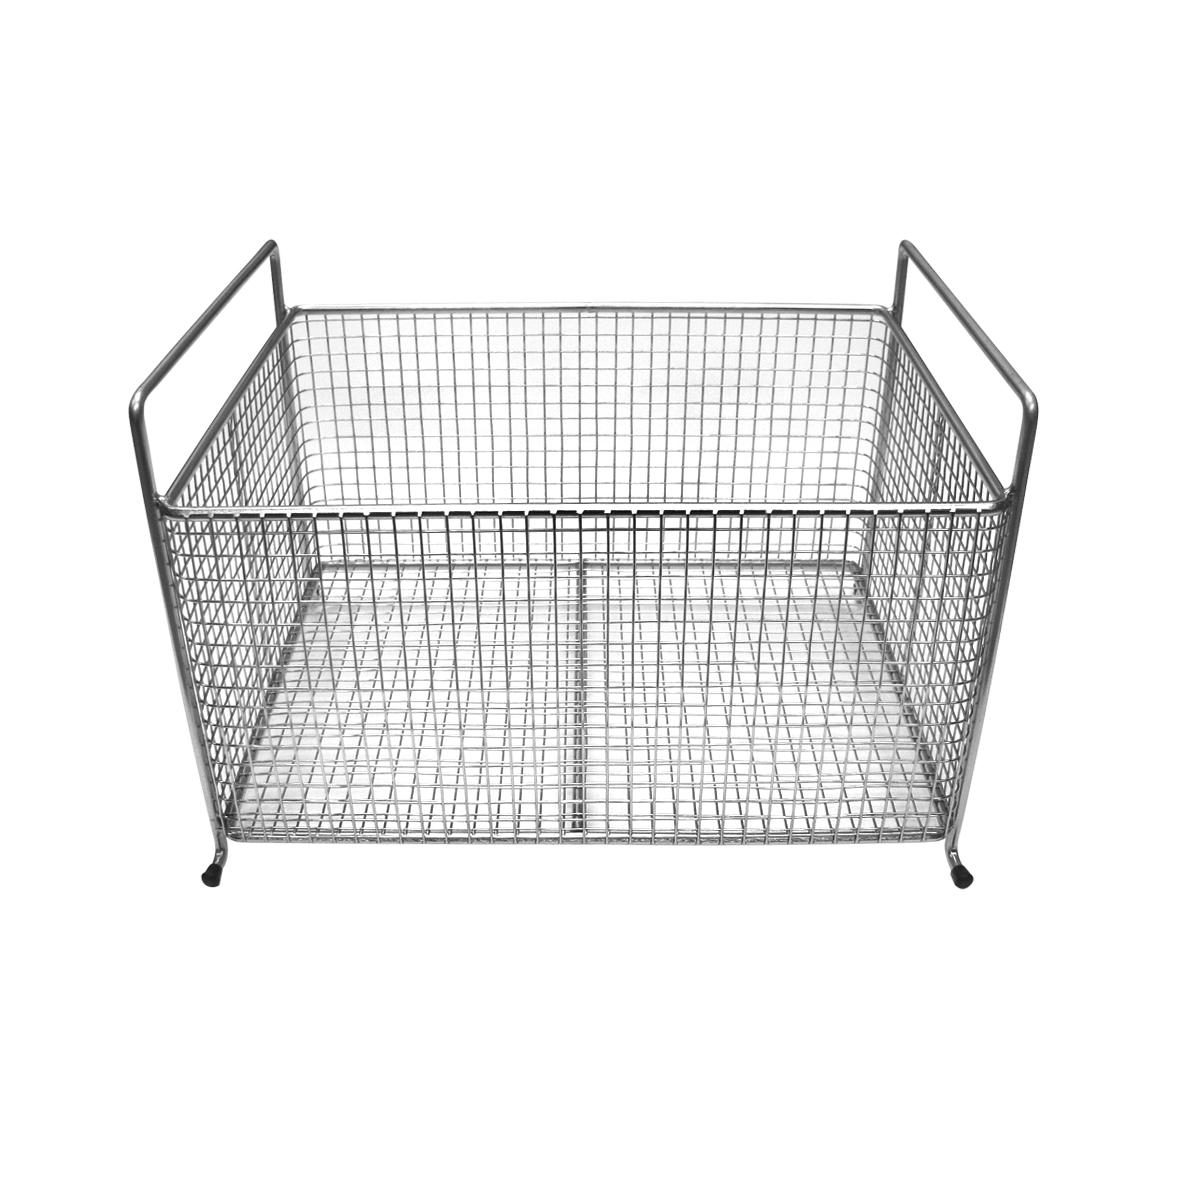 Standing basket, stainless steel, for Elma X-Tra 150